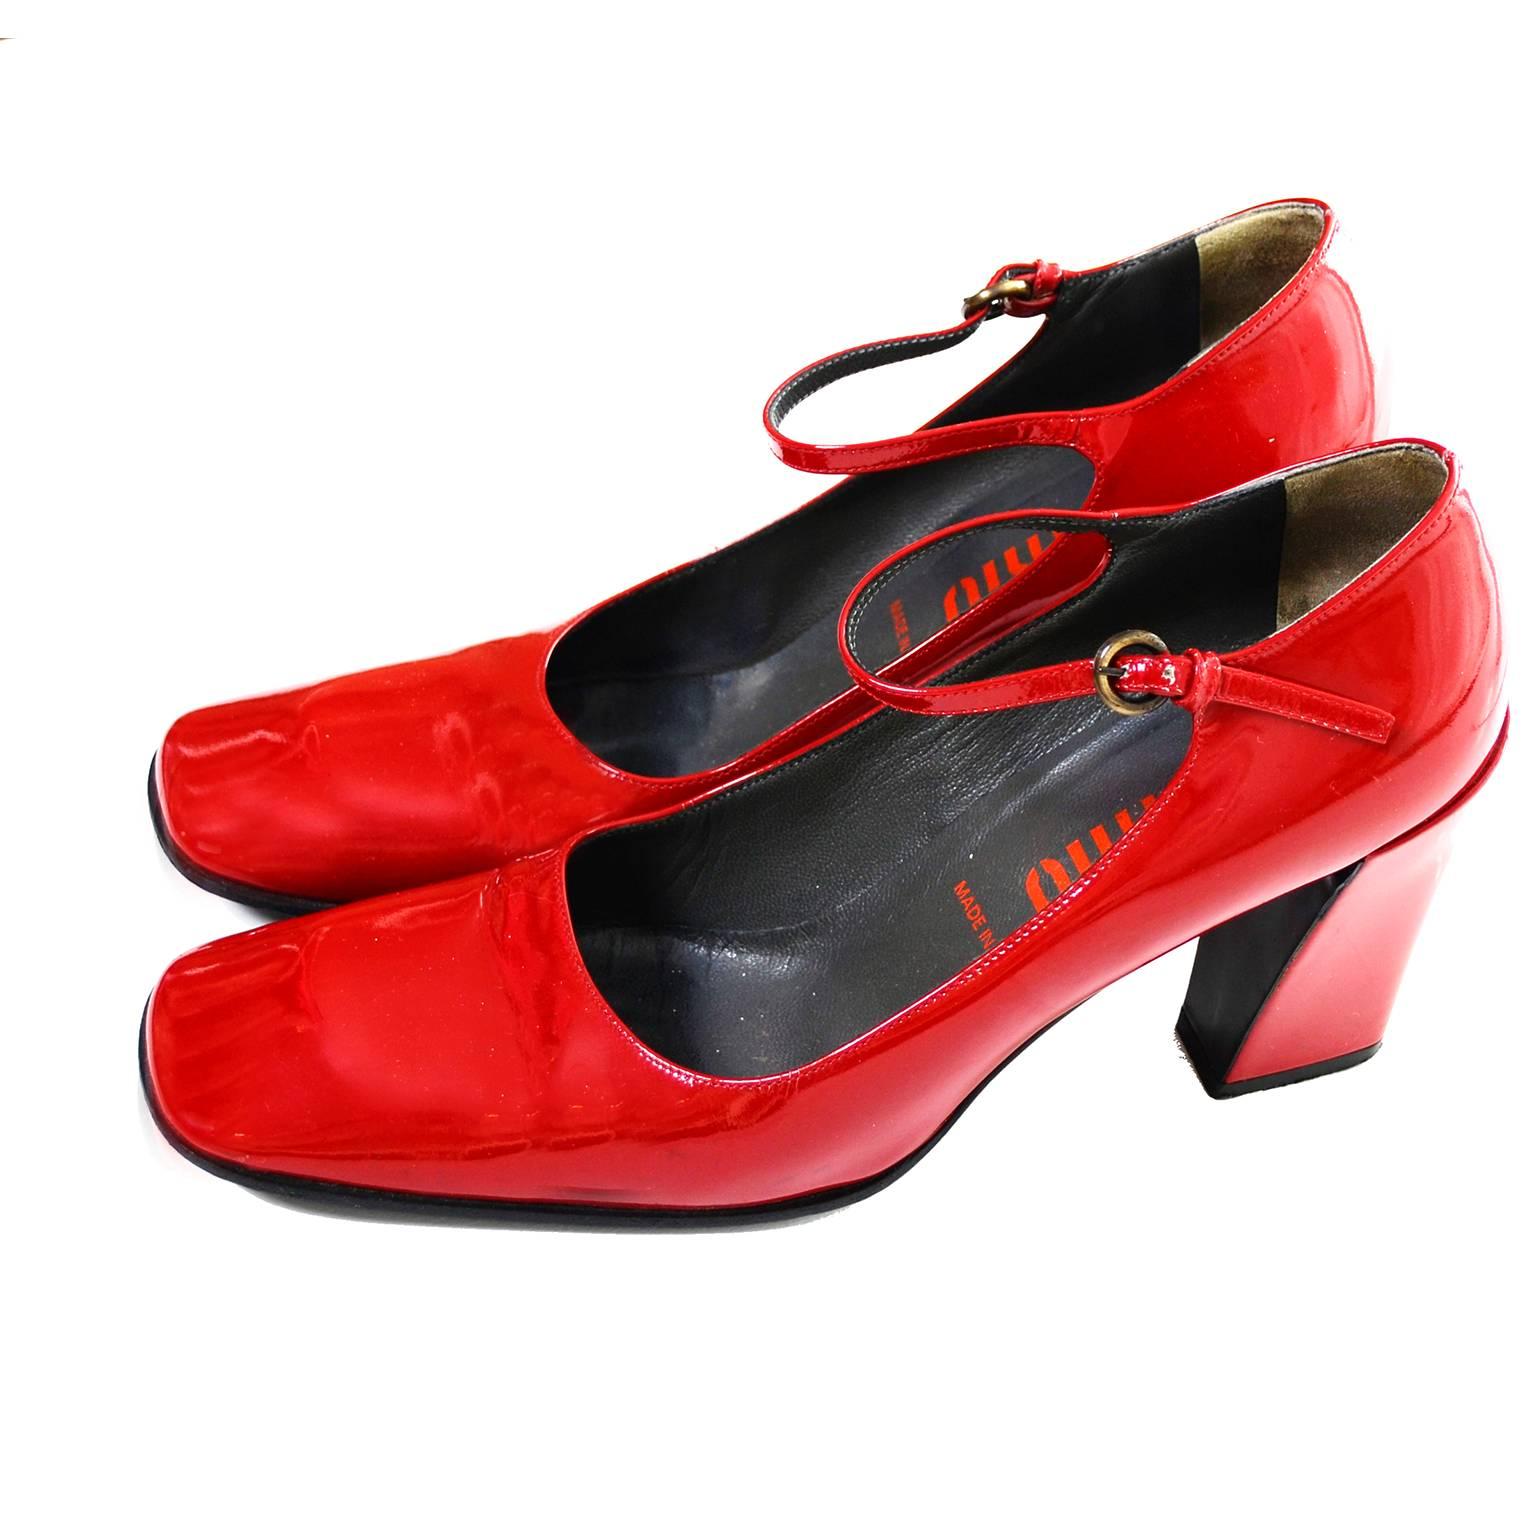 1990s Miu Miu Vintage Red Patent Leather Square Toe Mary Jane Shoes Heels 38